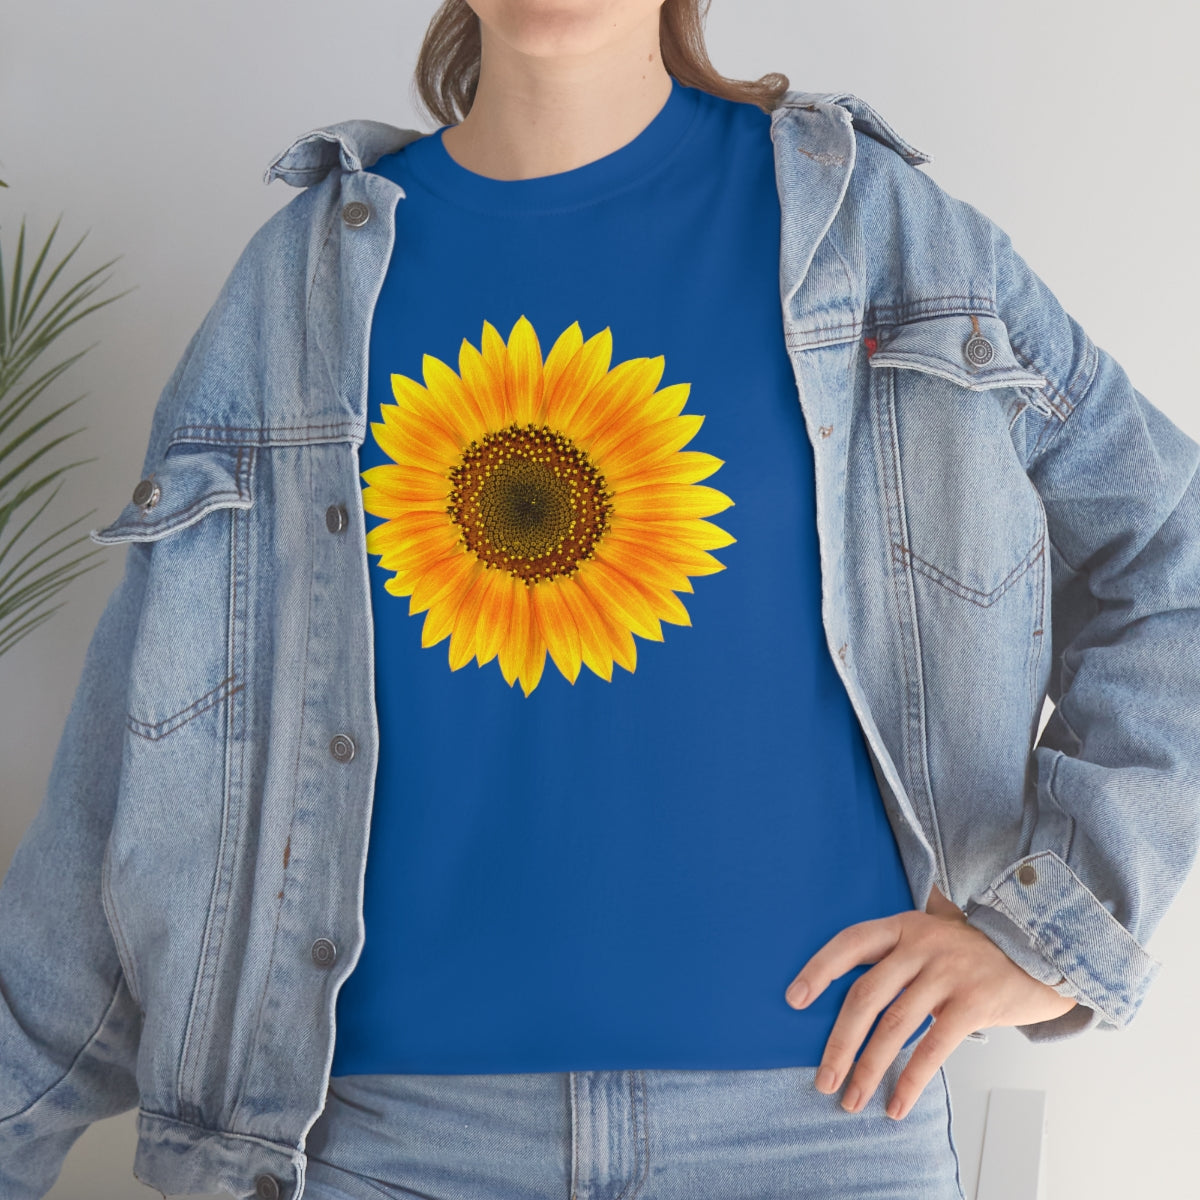 Mock up of woman wearing our royal blue Unisex Sunflower T-shirt